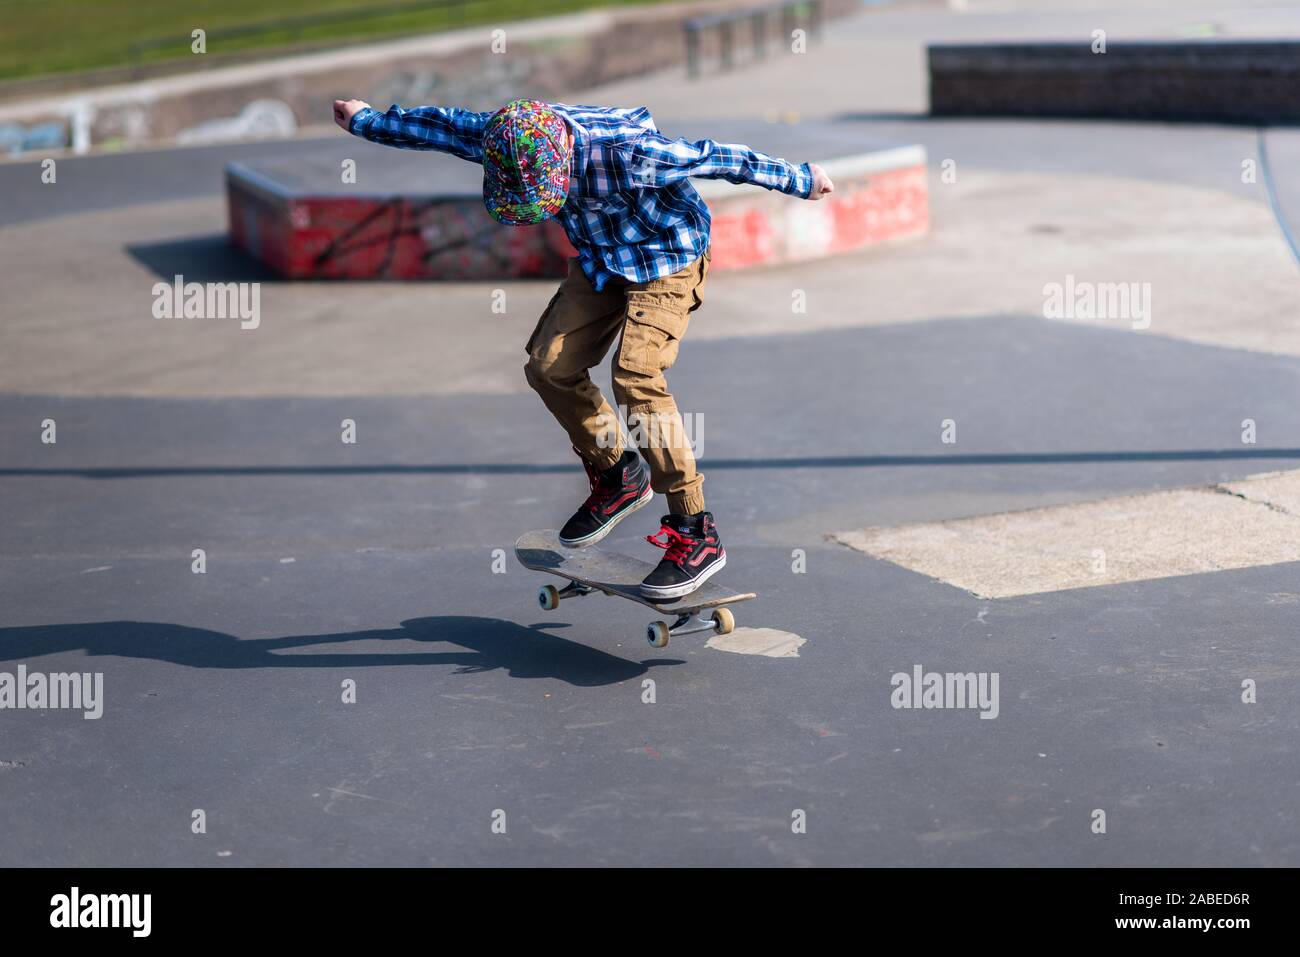 A cute little boy with ADHD, Autism, Asperger syndrome burns off energy at the Skateboard park, practicing tricks such as the ollie and jumping steps Stock Photo